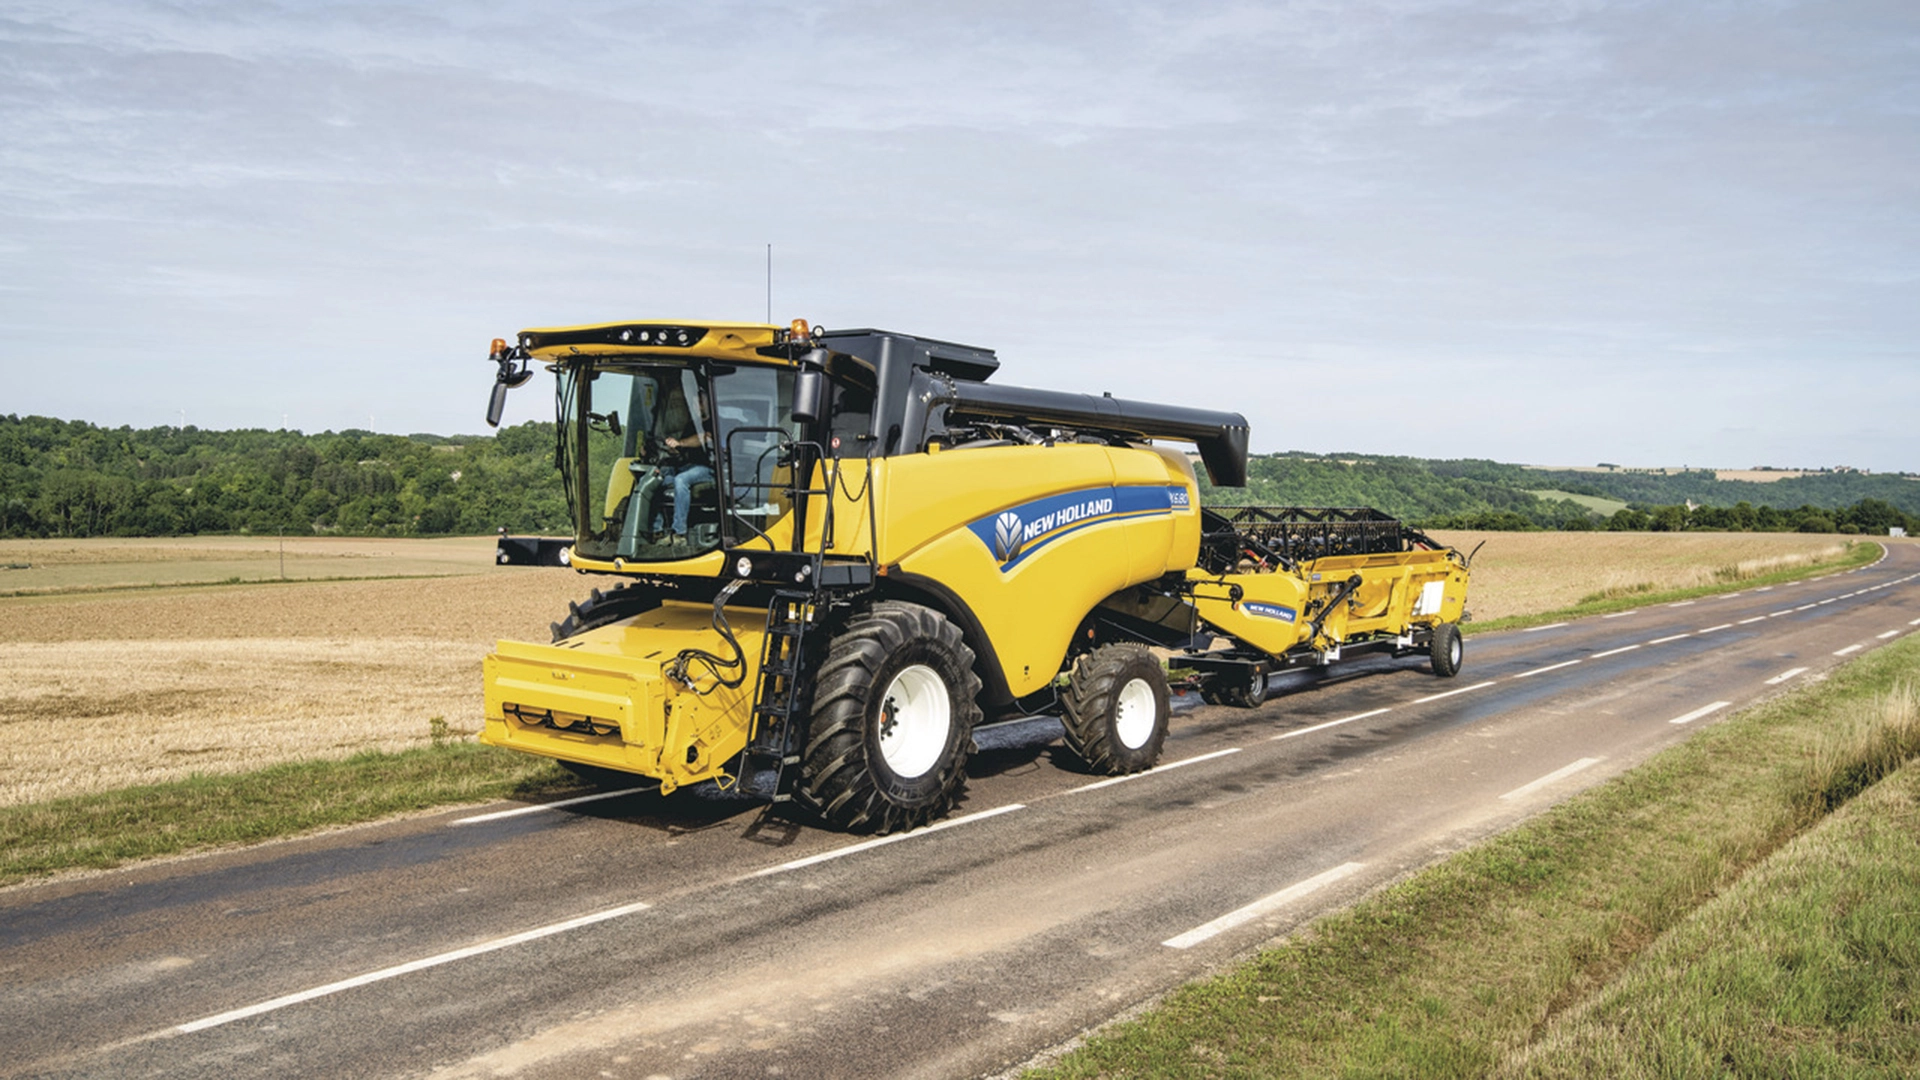 CX5-CX6 - New Holland Combine harvester on the road